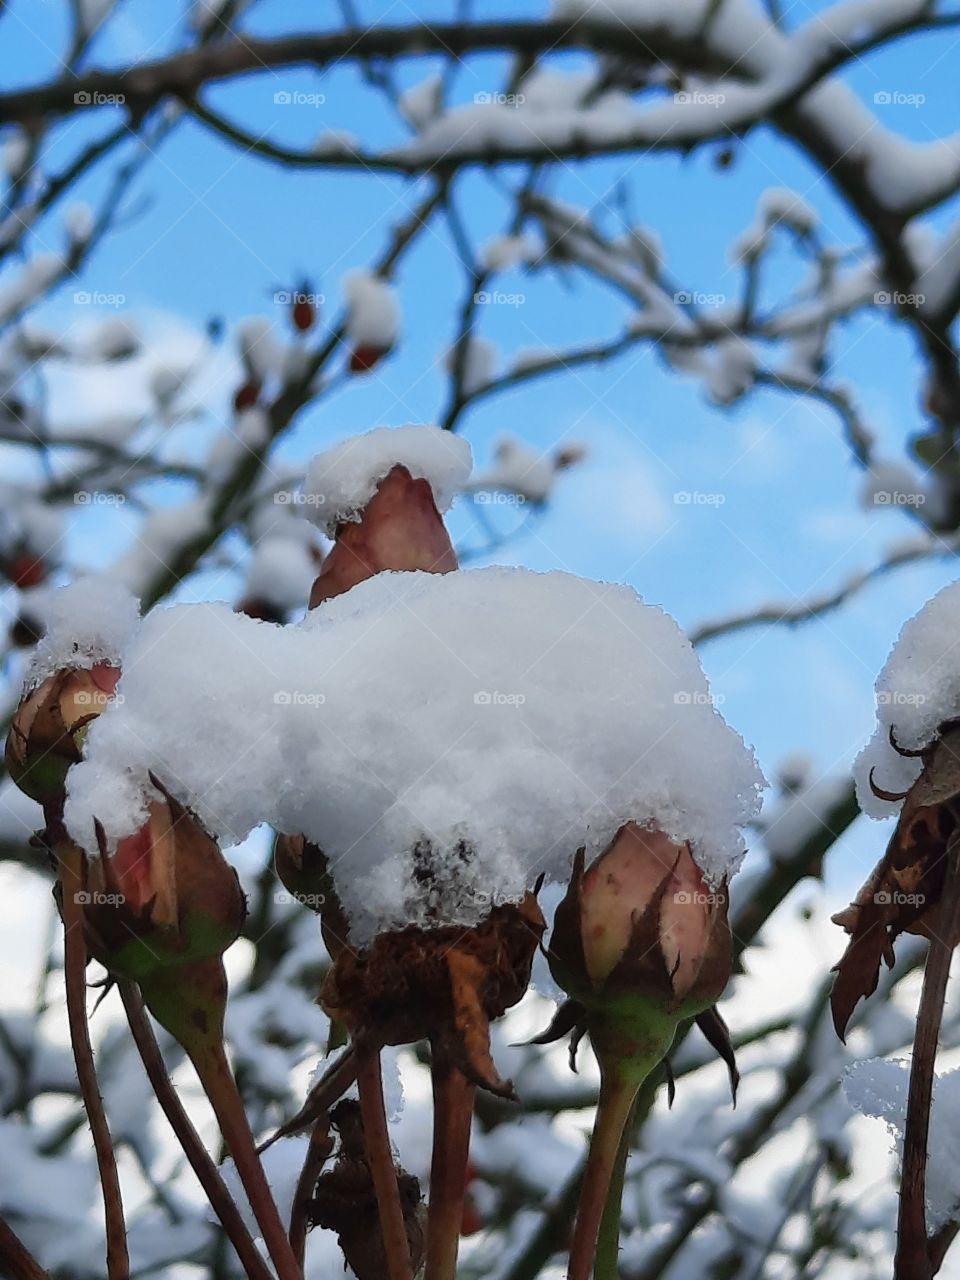 winter nature - pink rose buds covered with fresh snow against blue sky